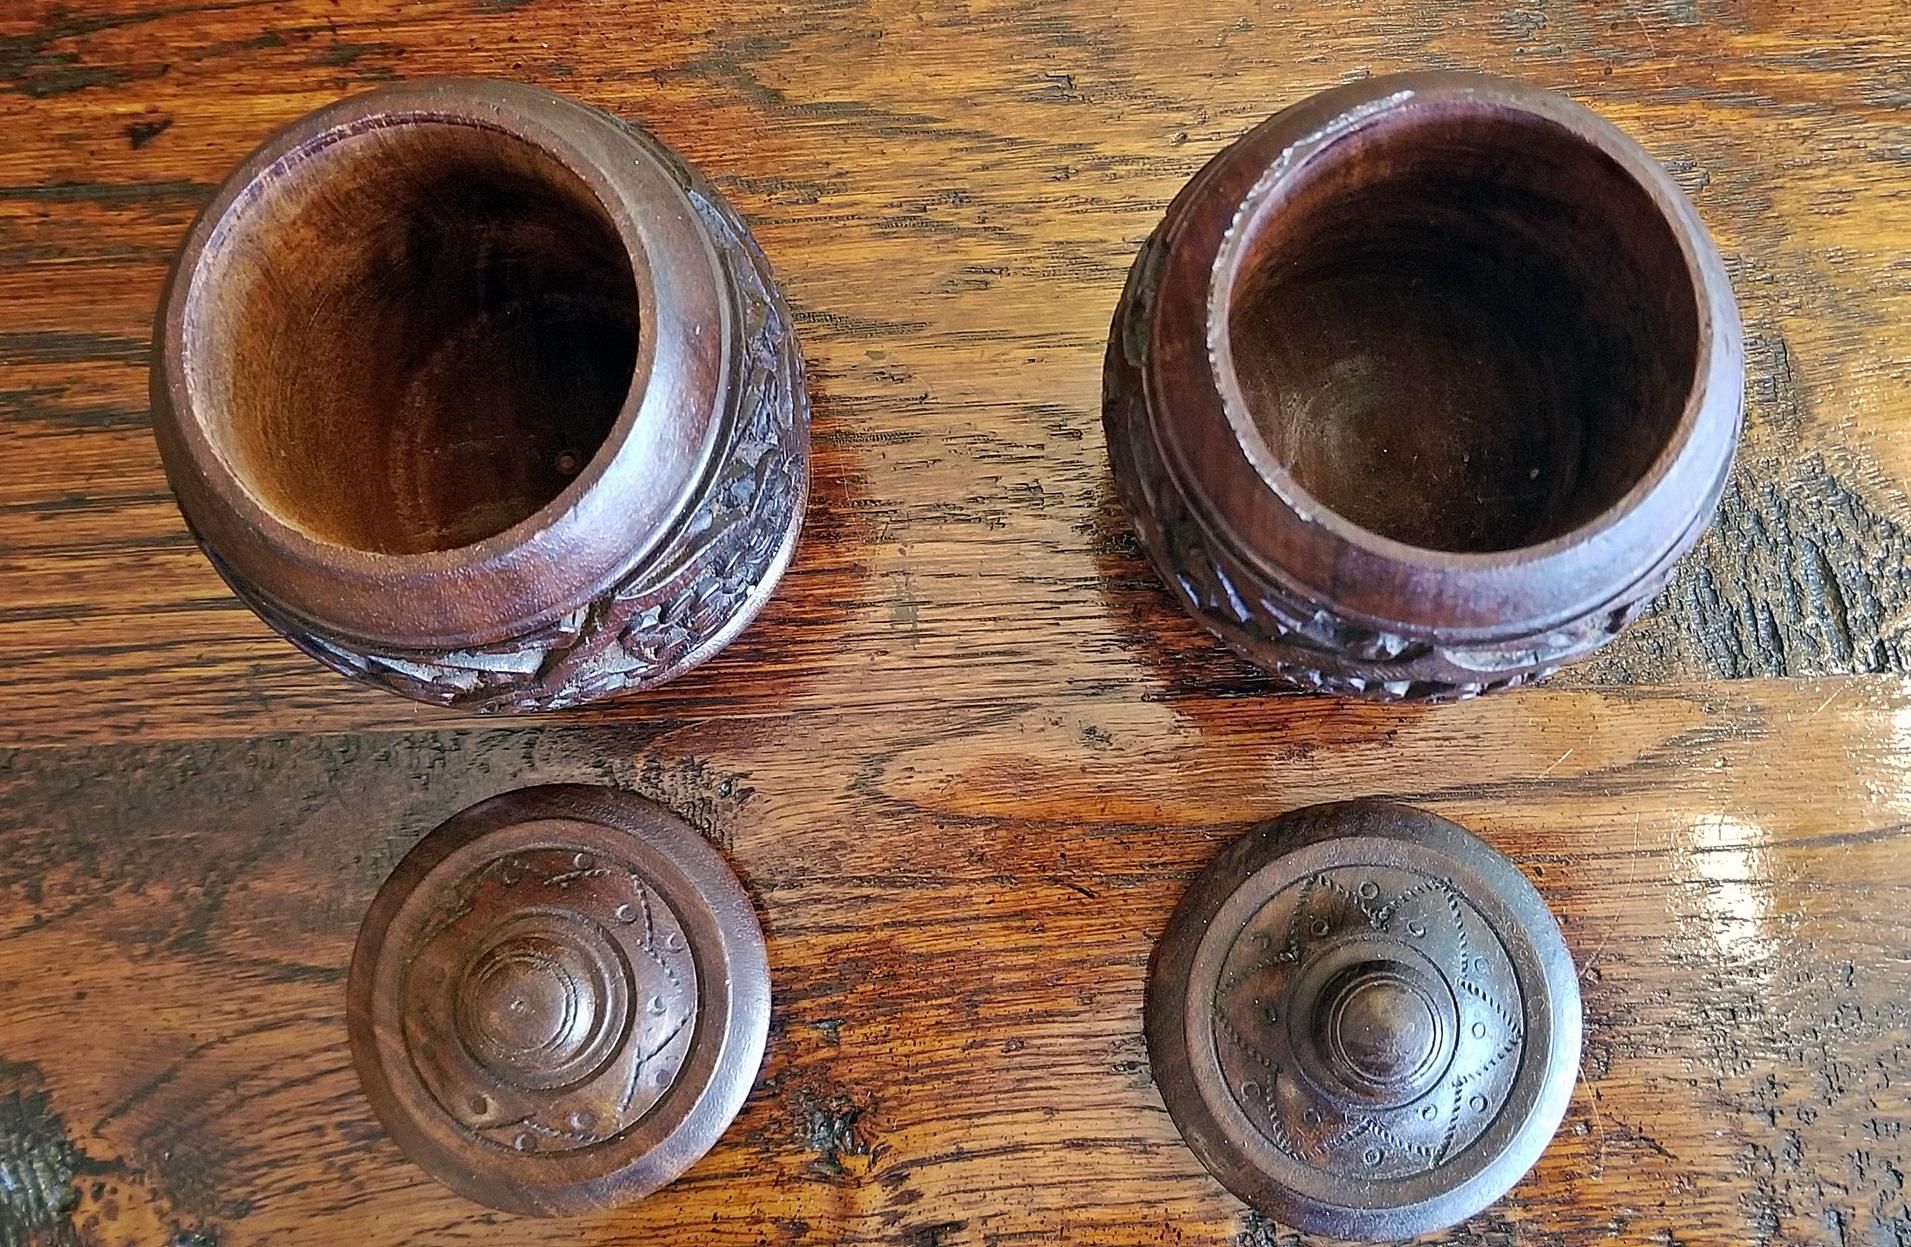 Nice pair of Anglo-Indian, hand-carved spice/tobacco jars.

19th century Anglo-Indian pair of carved wooden spice urns.

19th century, circa 1890 with beautiful floral carvings in rosewood.

History of spices: The spice trade developed